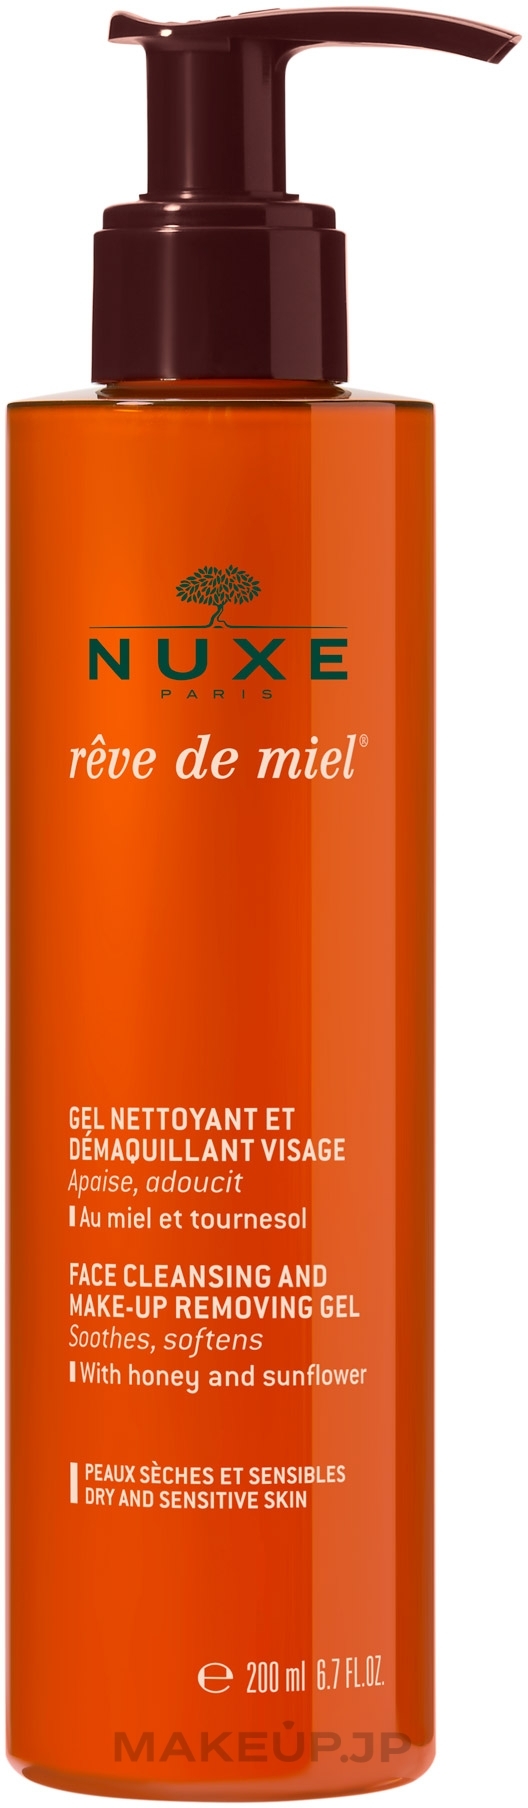 Cleansing Face Gel "Honey Dream" - Nuxe Reve de Miel Face Cleansing And Make-Up Removing Gel — photo 200 ml